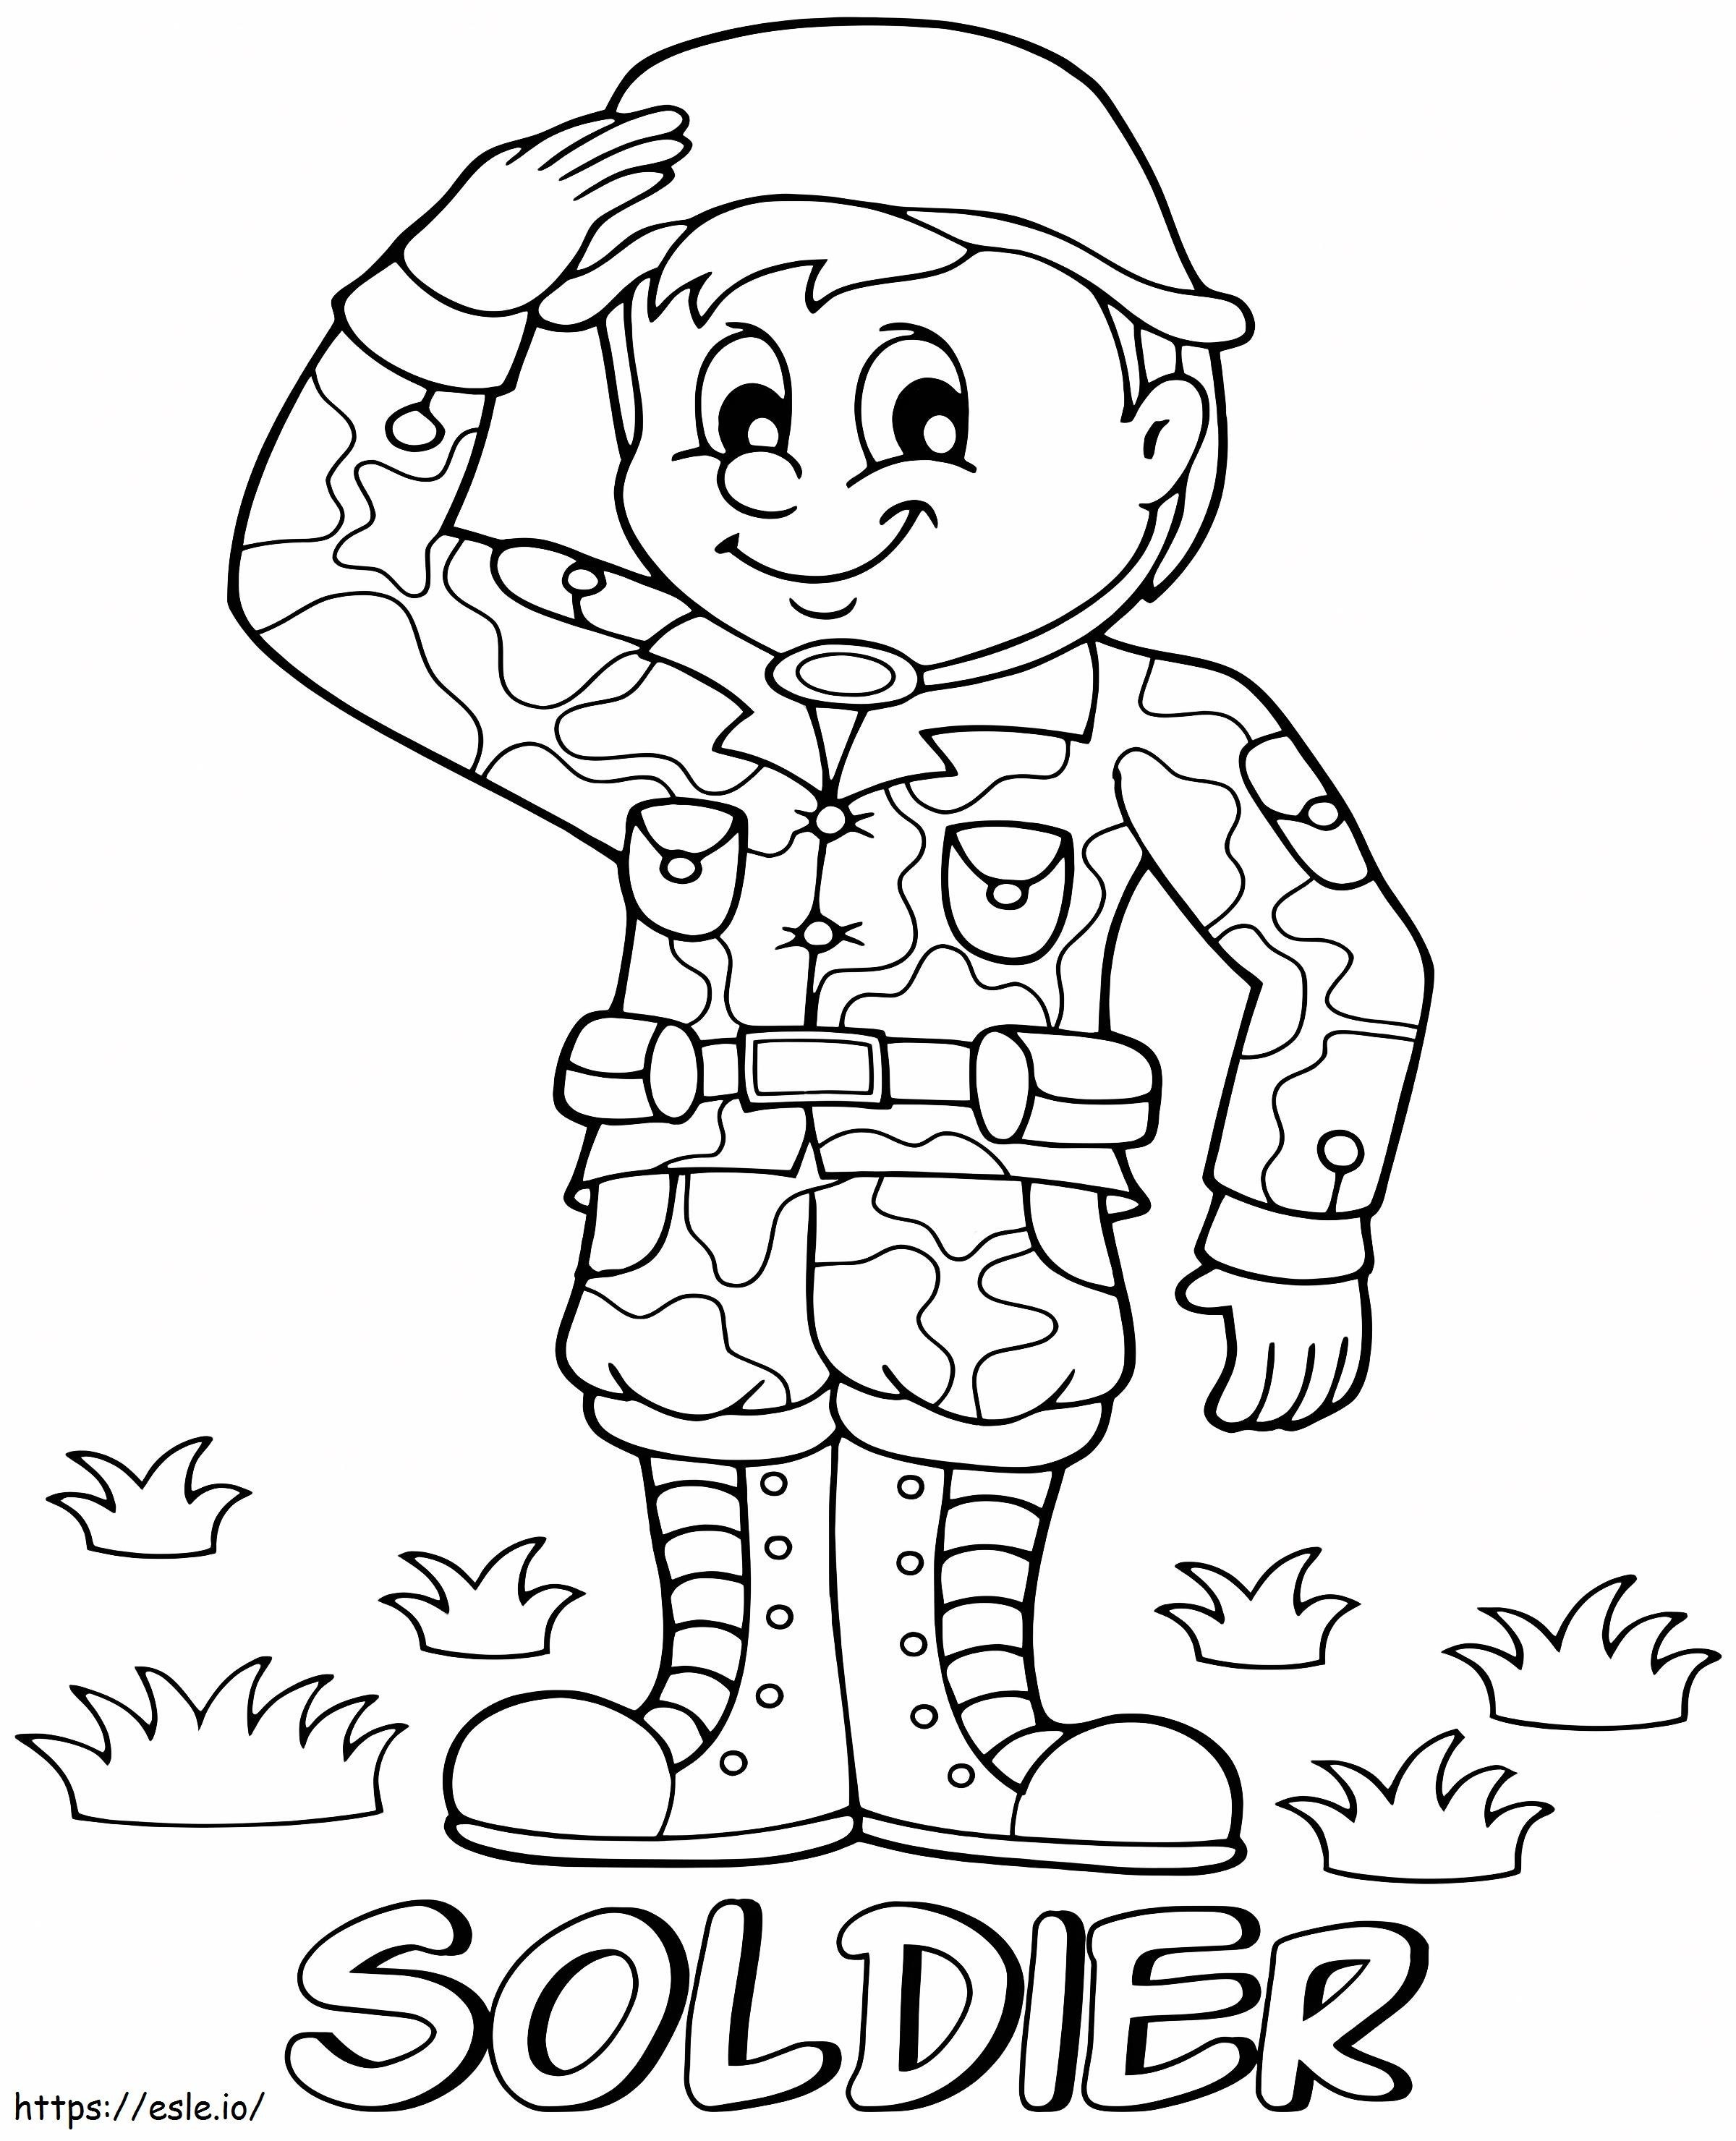 Young Solider coloring page